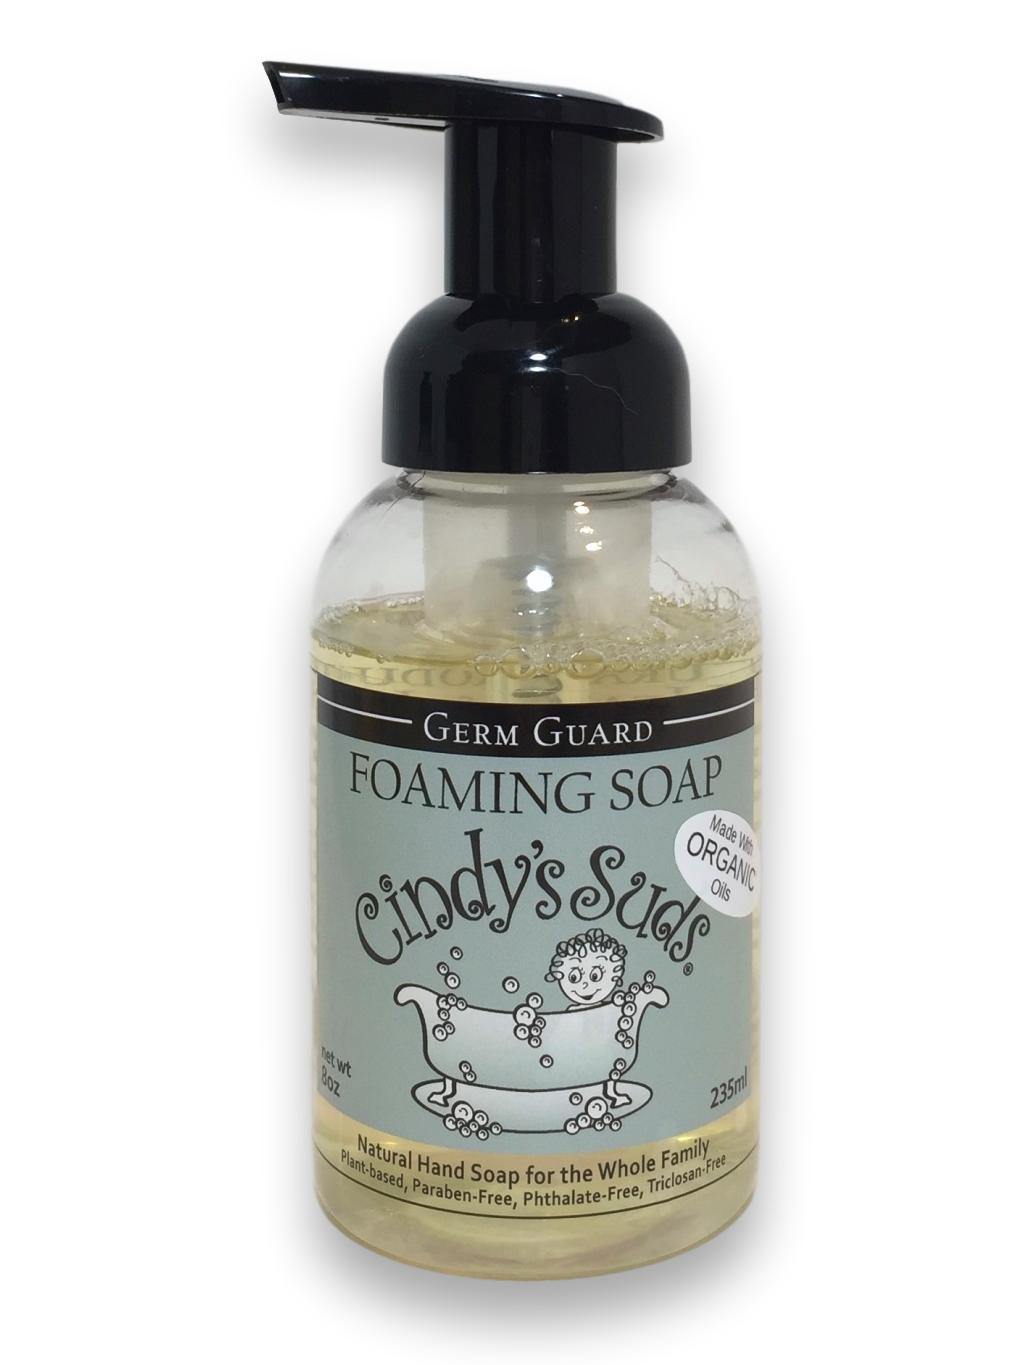 Cindy's Suds Foaming Soap - Germ Guard - ECOBUNS BABY + CO.